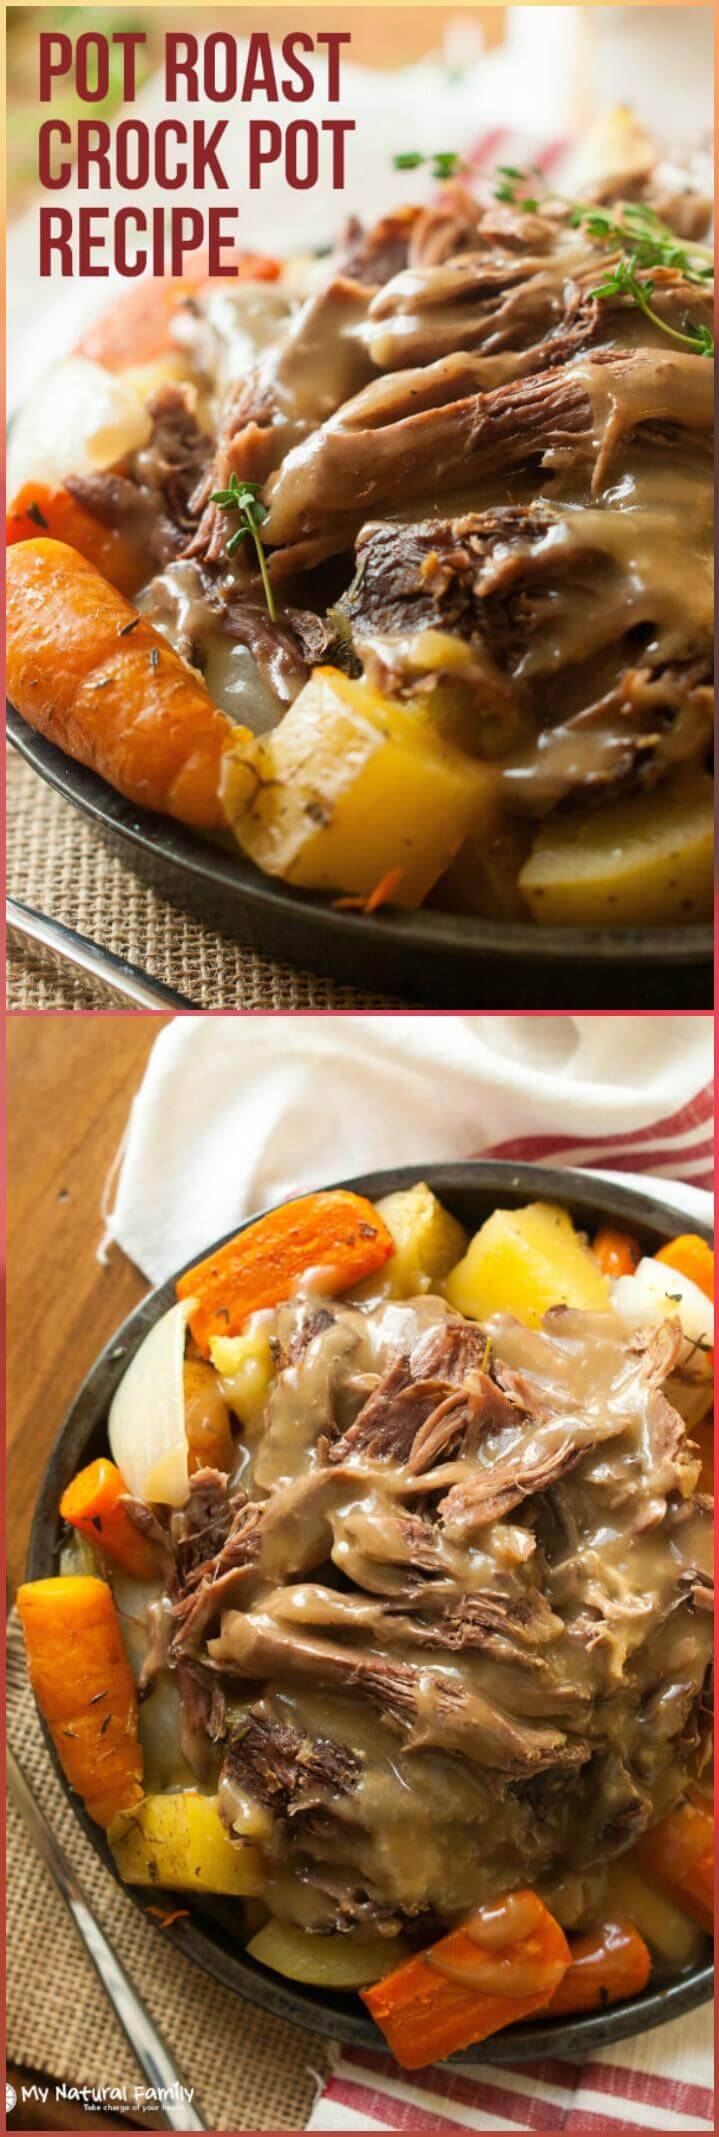 100 Easy Slow Cooker Recipes - Crock Pot Recipes for Busy Timing ⋆ DIY ...